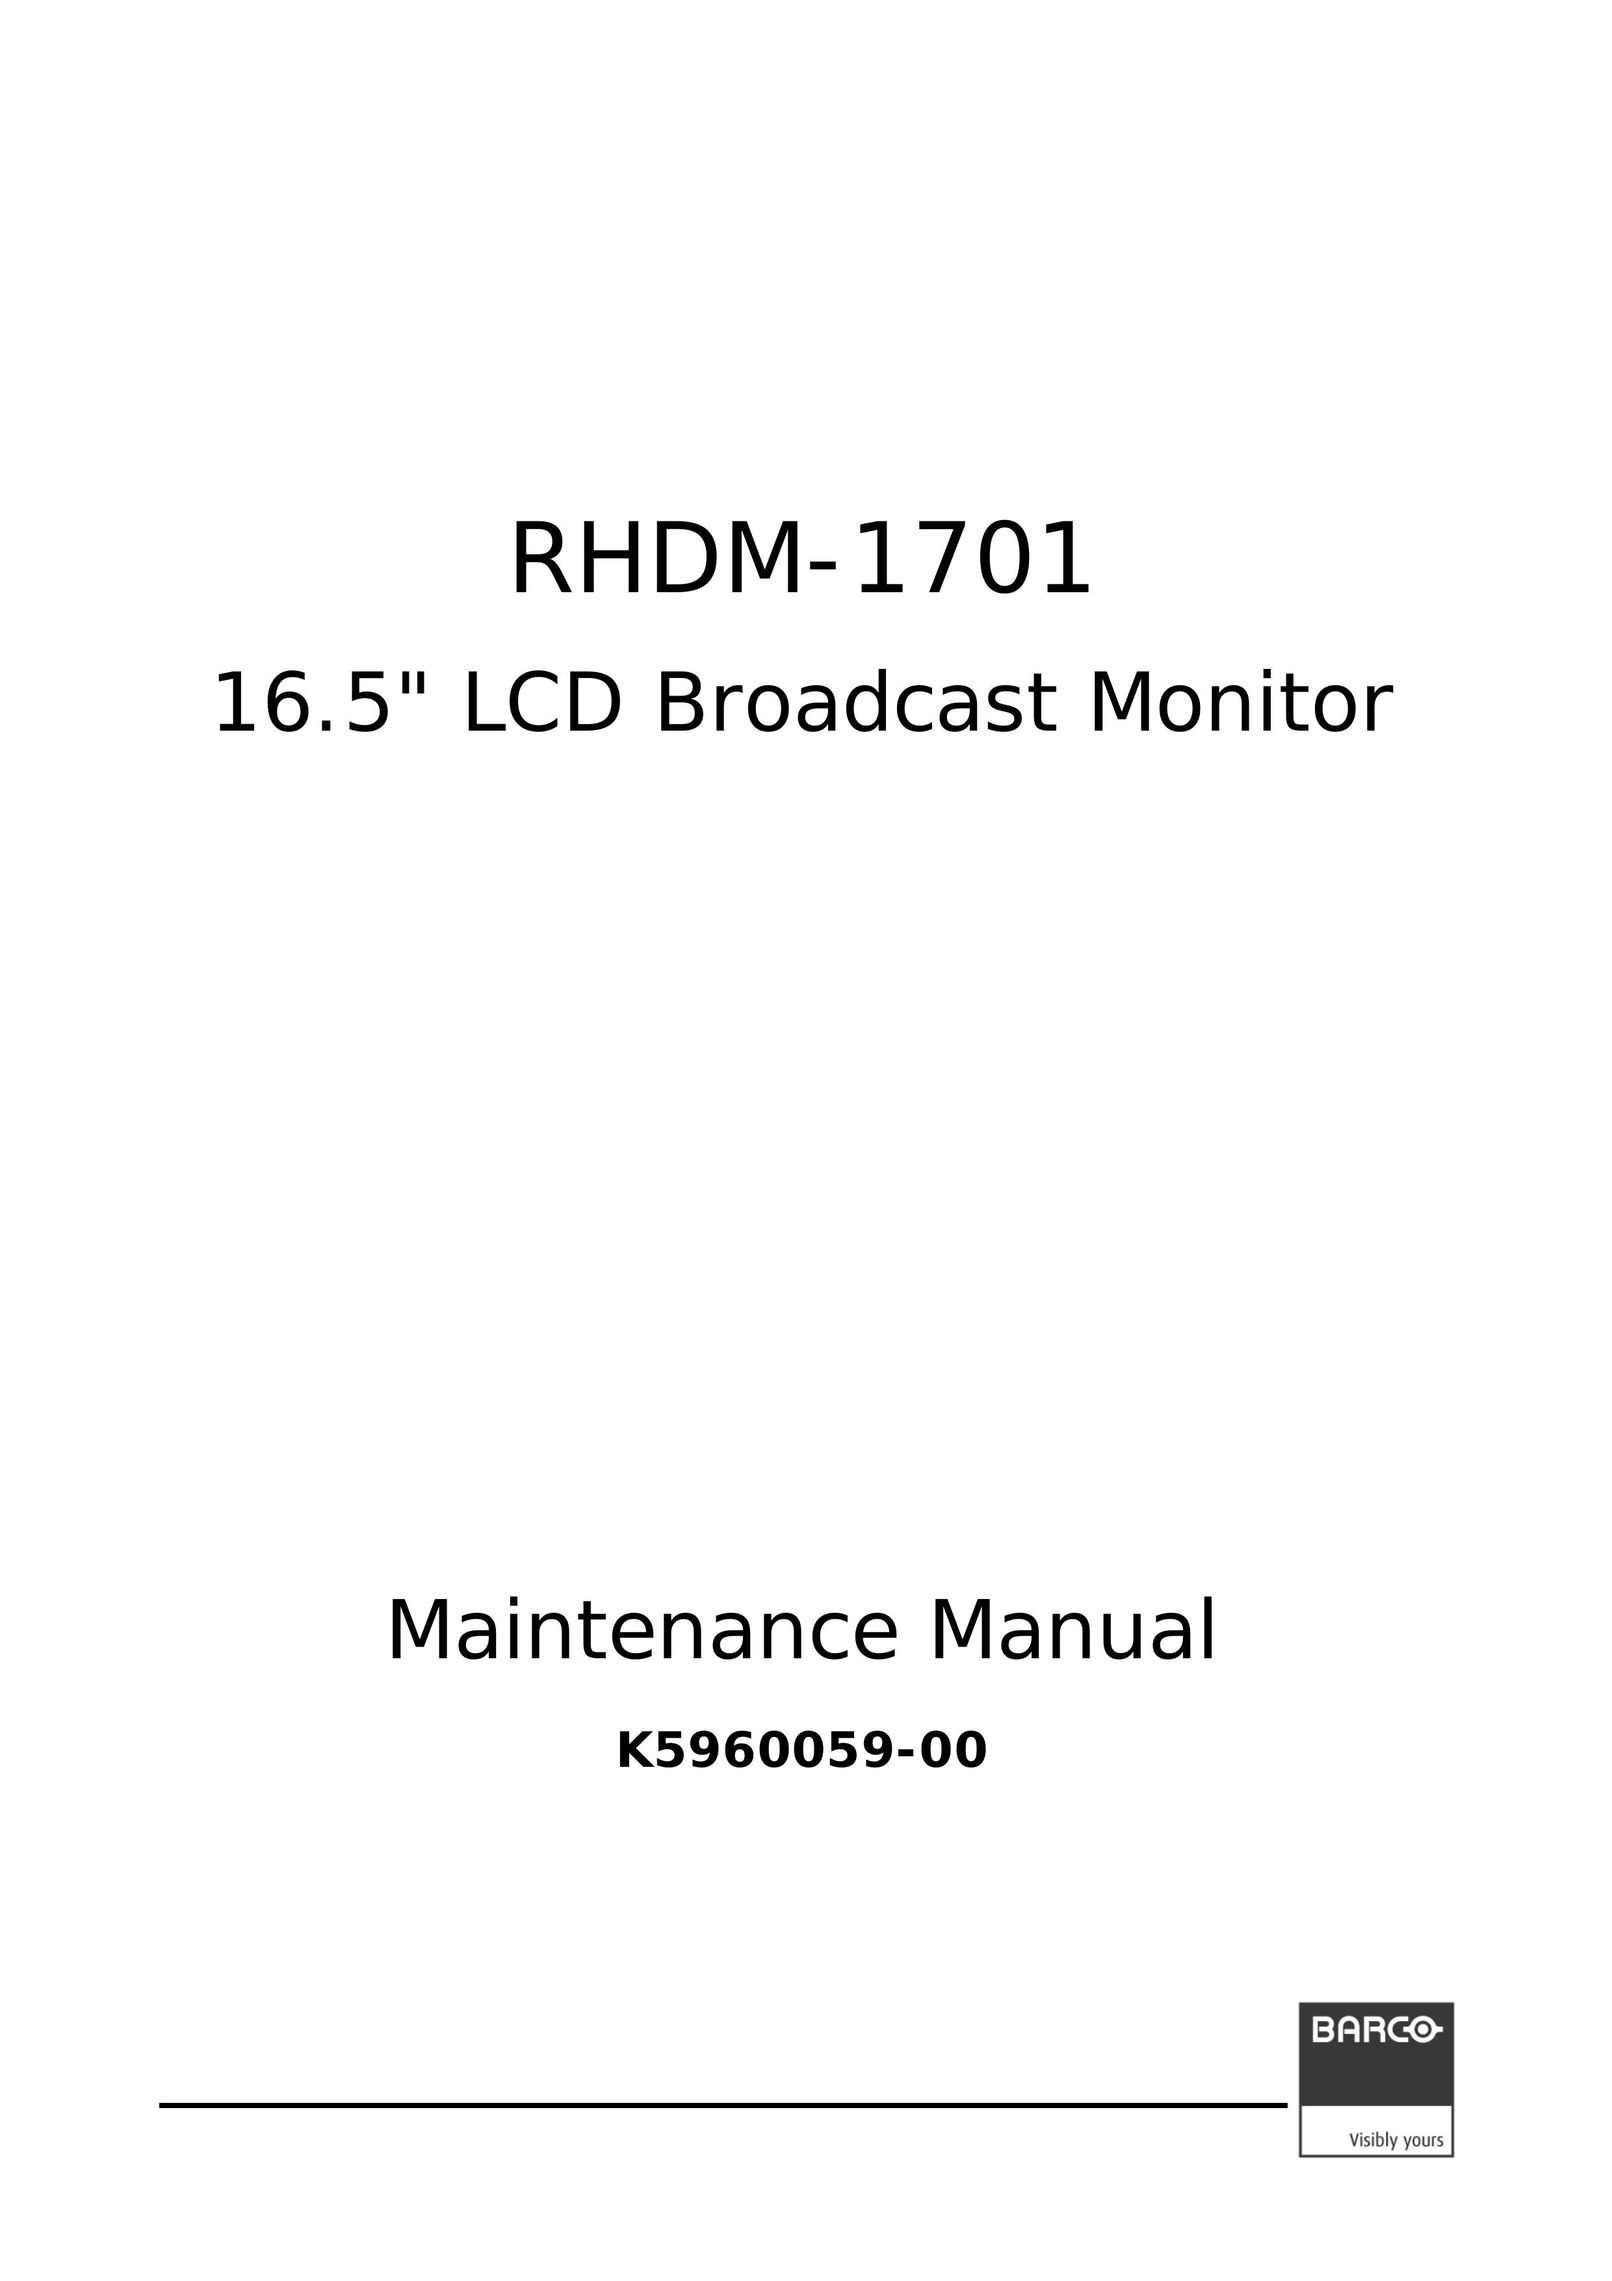 Barco RHDM-1701 Projection Television User Manual